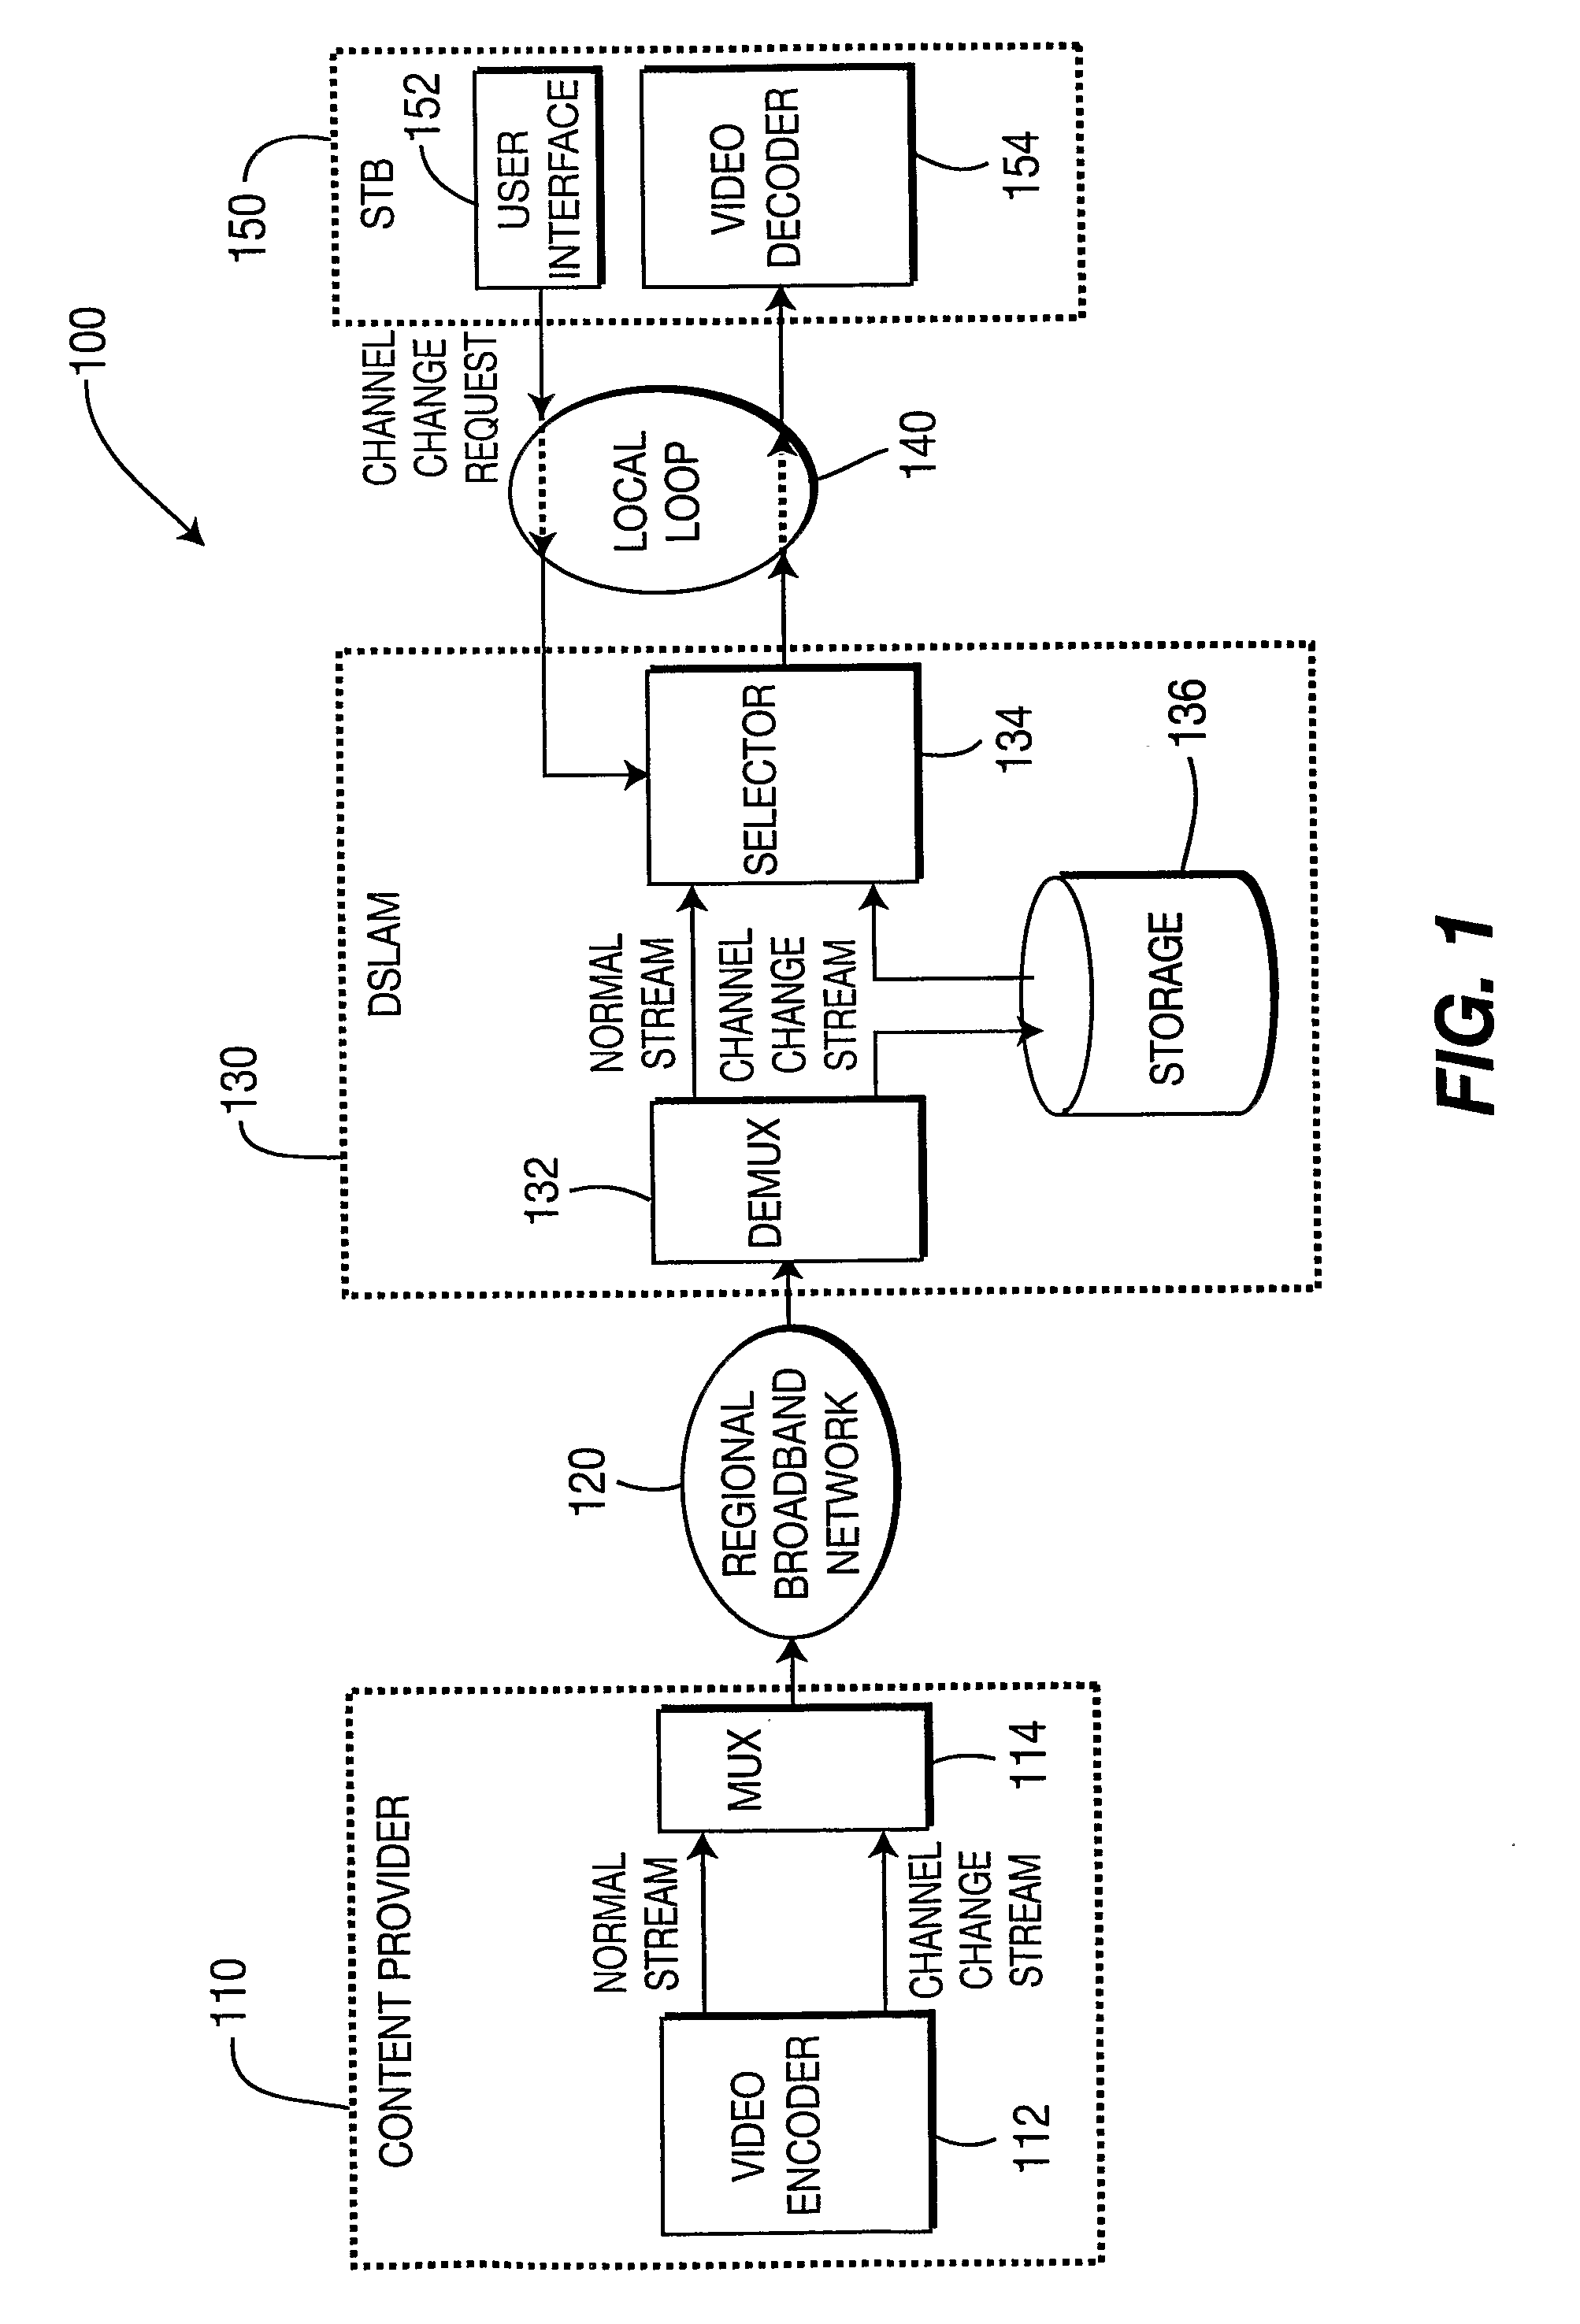 Method and Apparatus for Channel Change in Dsl System